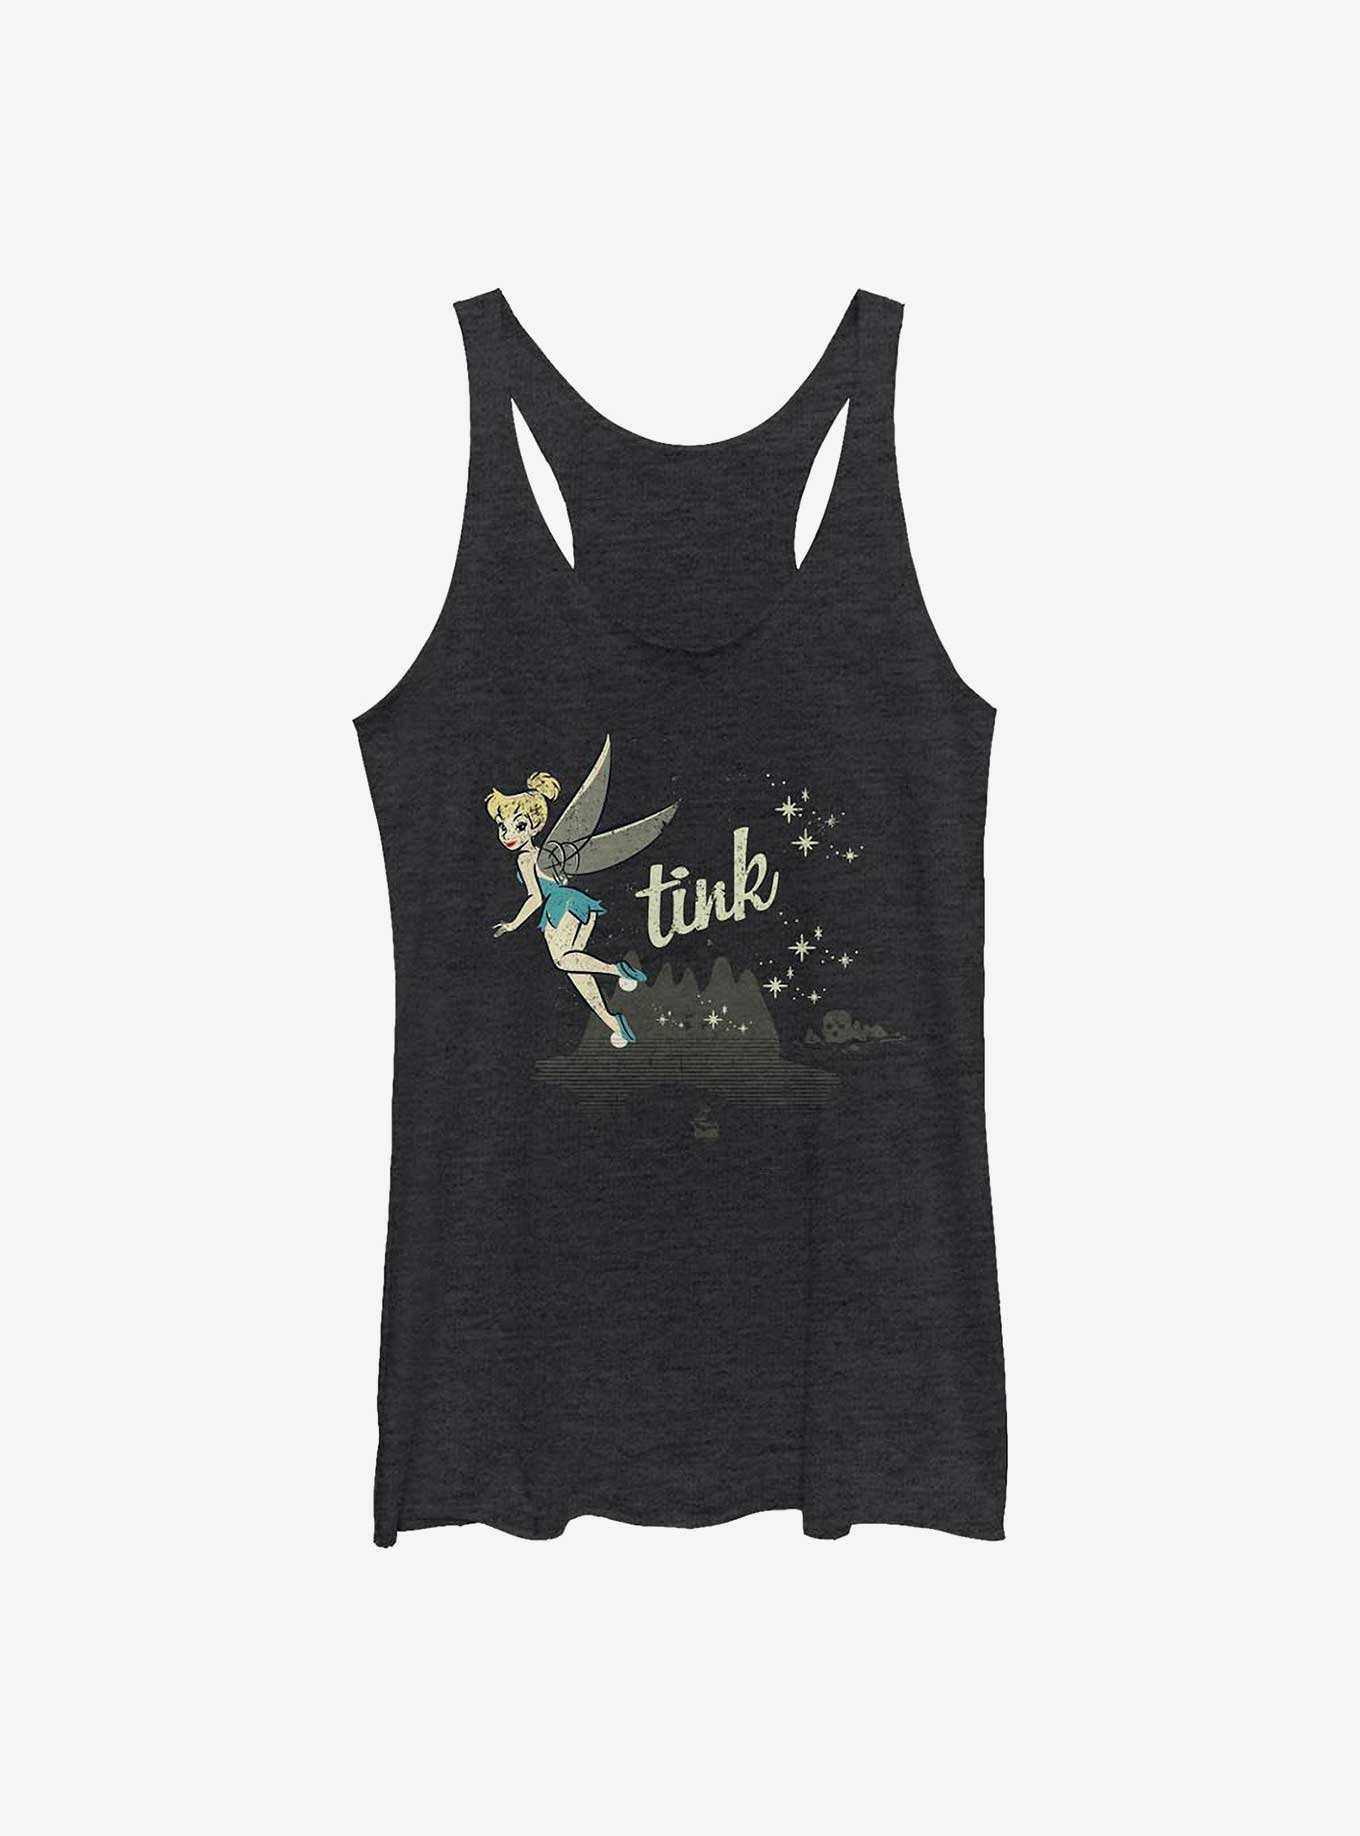 OFFICIAL Peter Pan Merchandise, Shirts & More